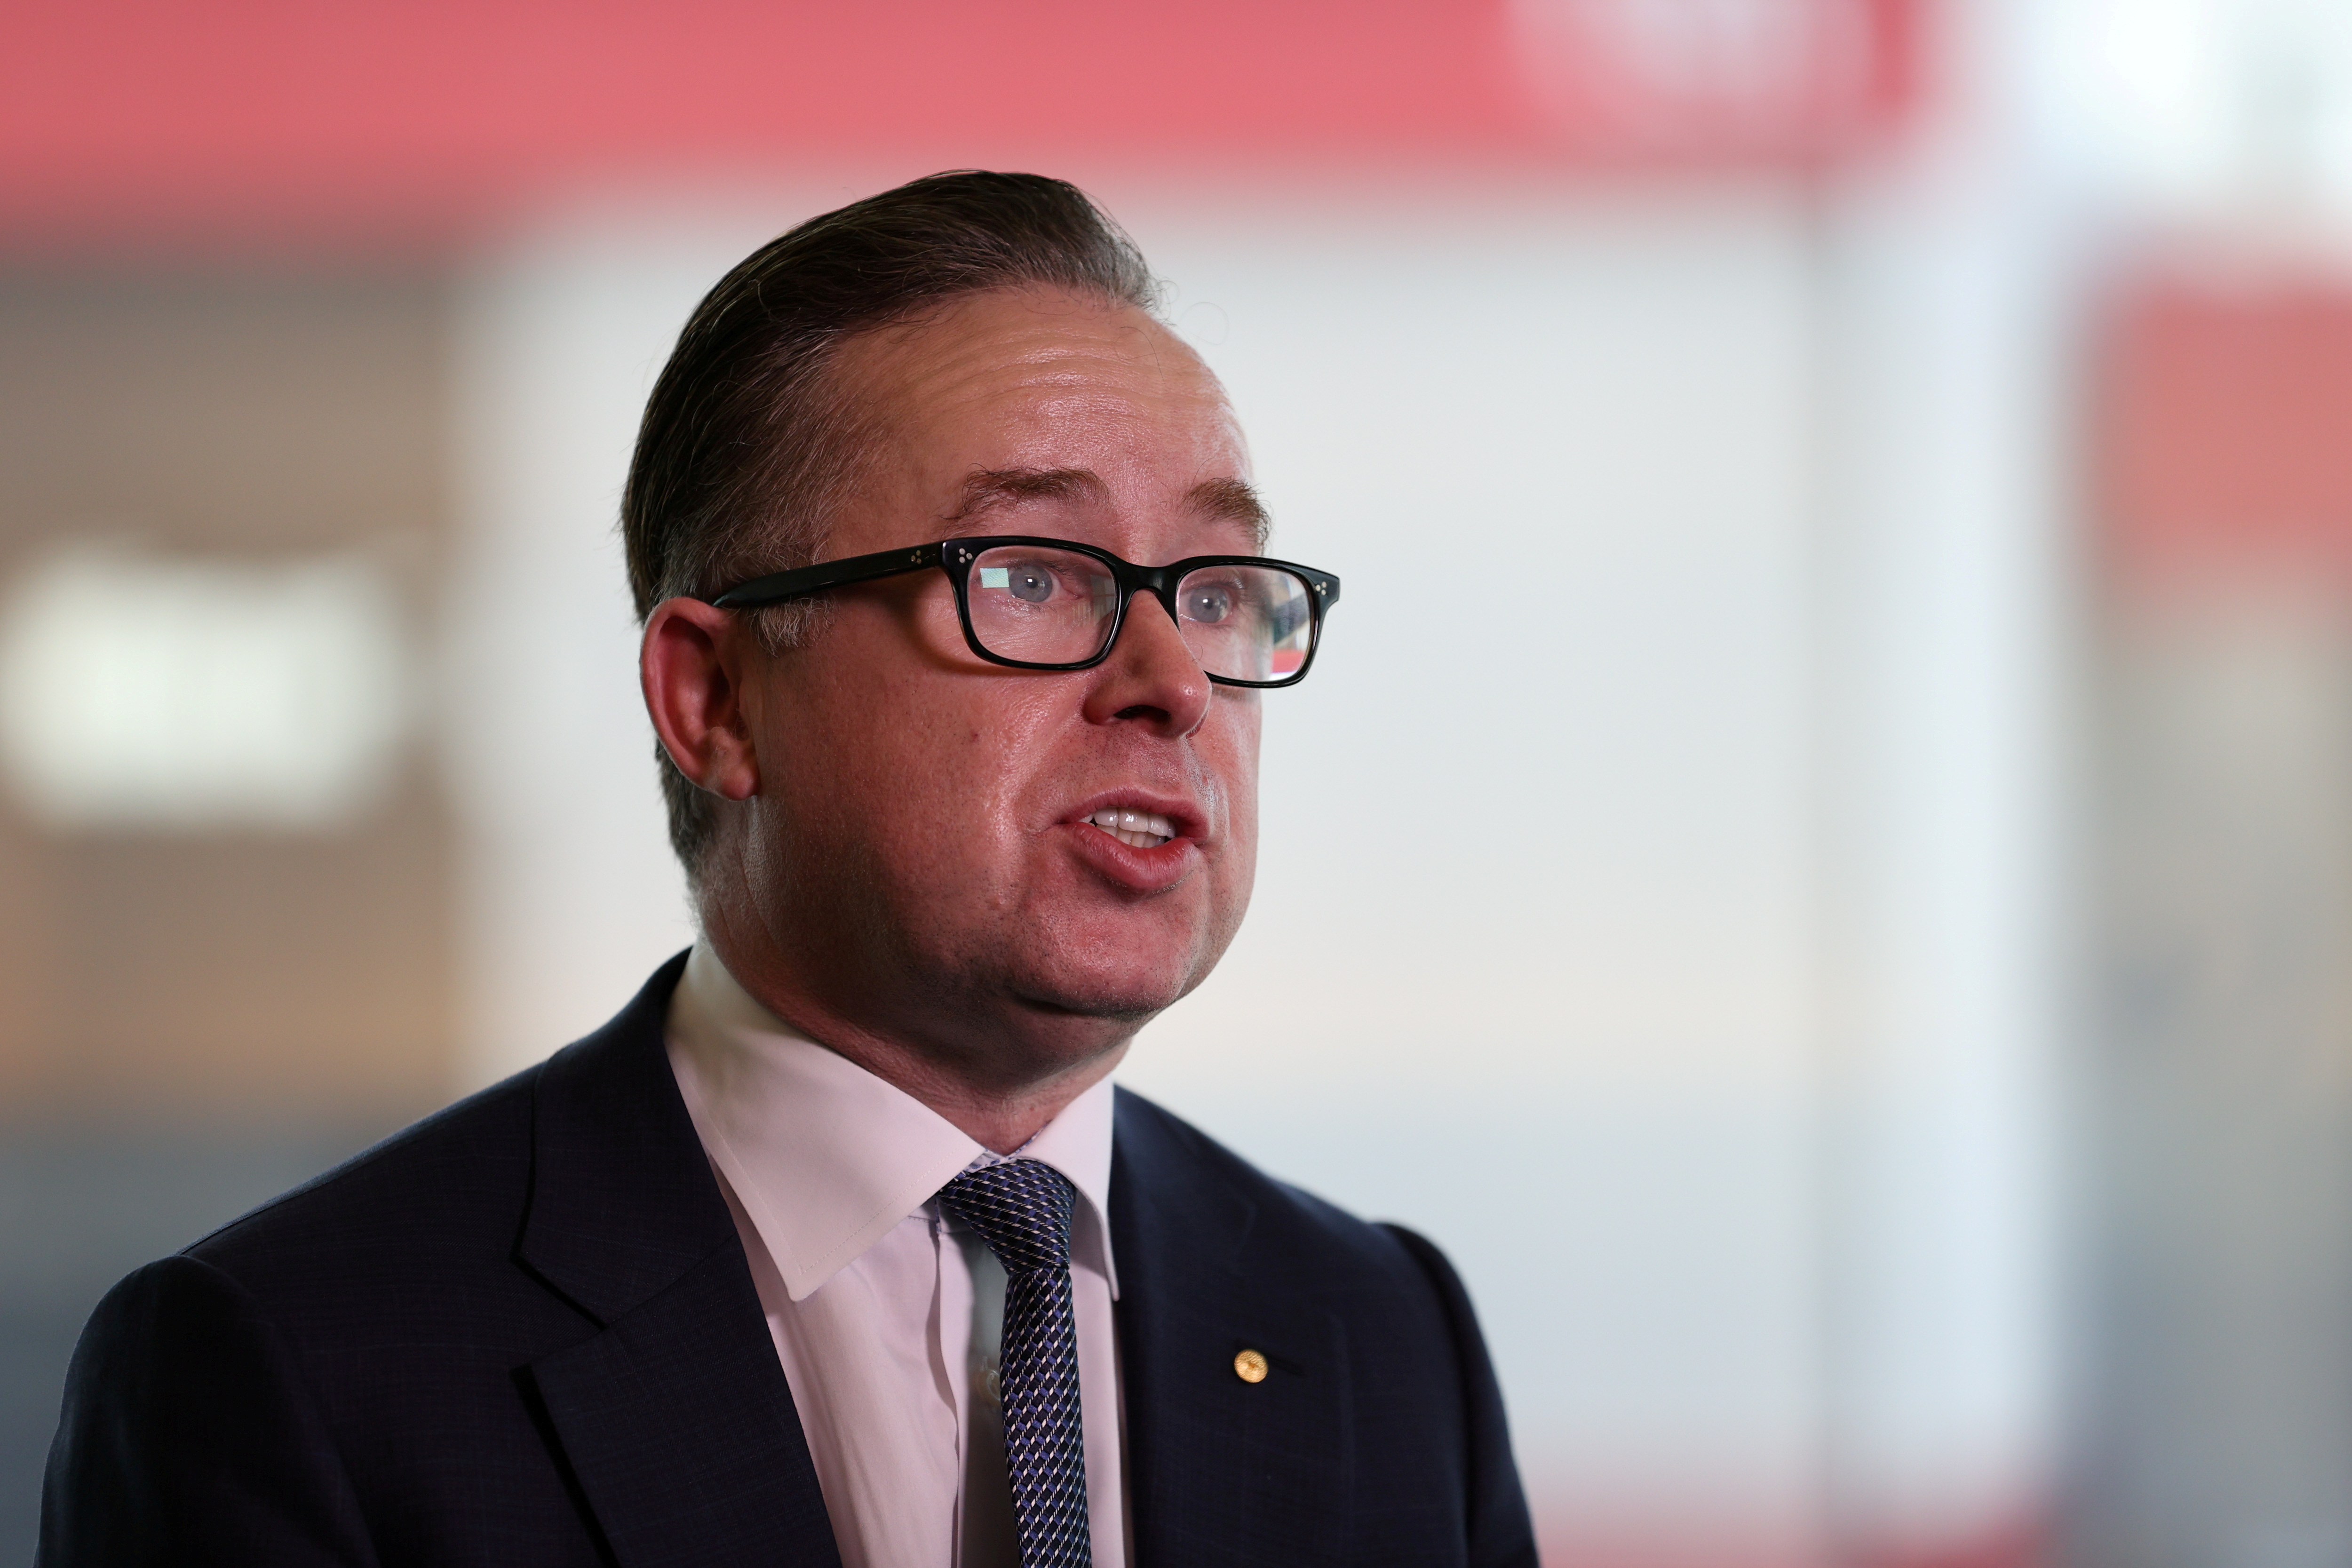 Qantas' CEO speaks with members of the media at an event in Sydney